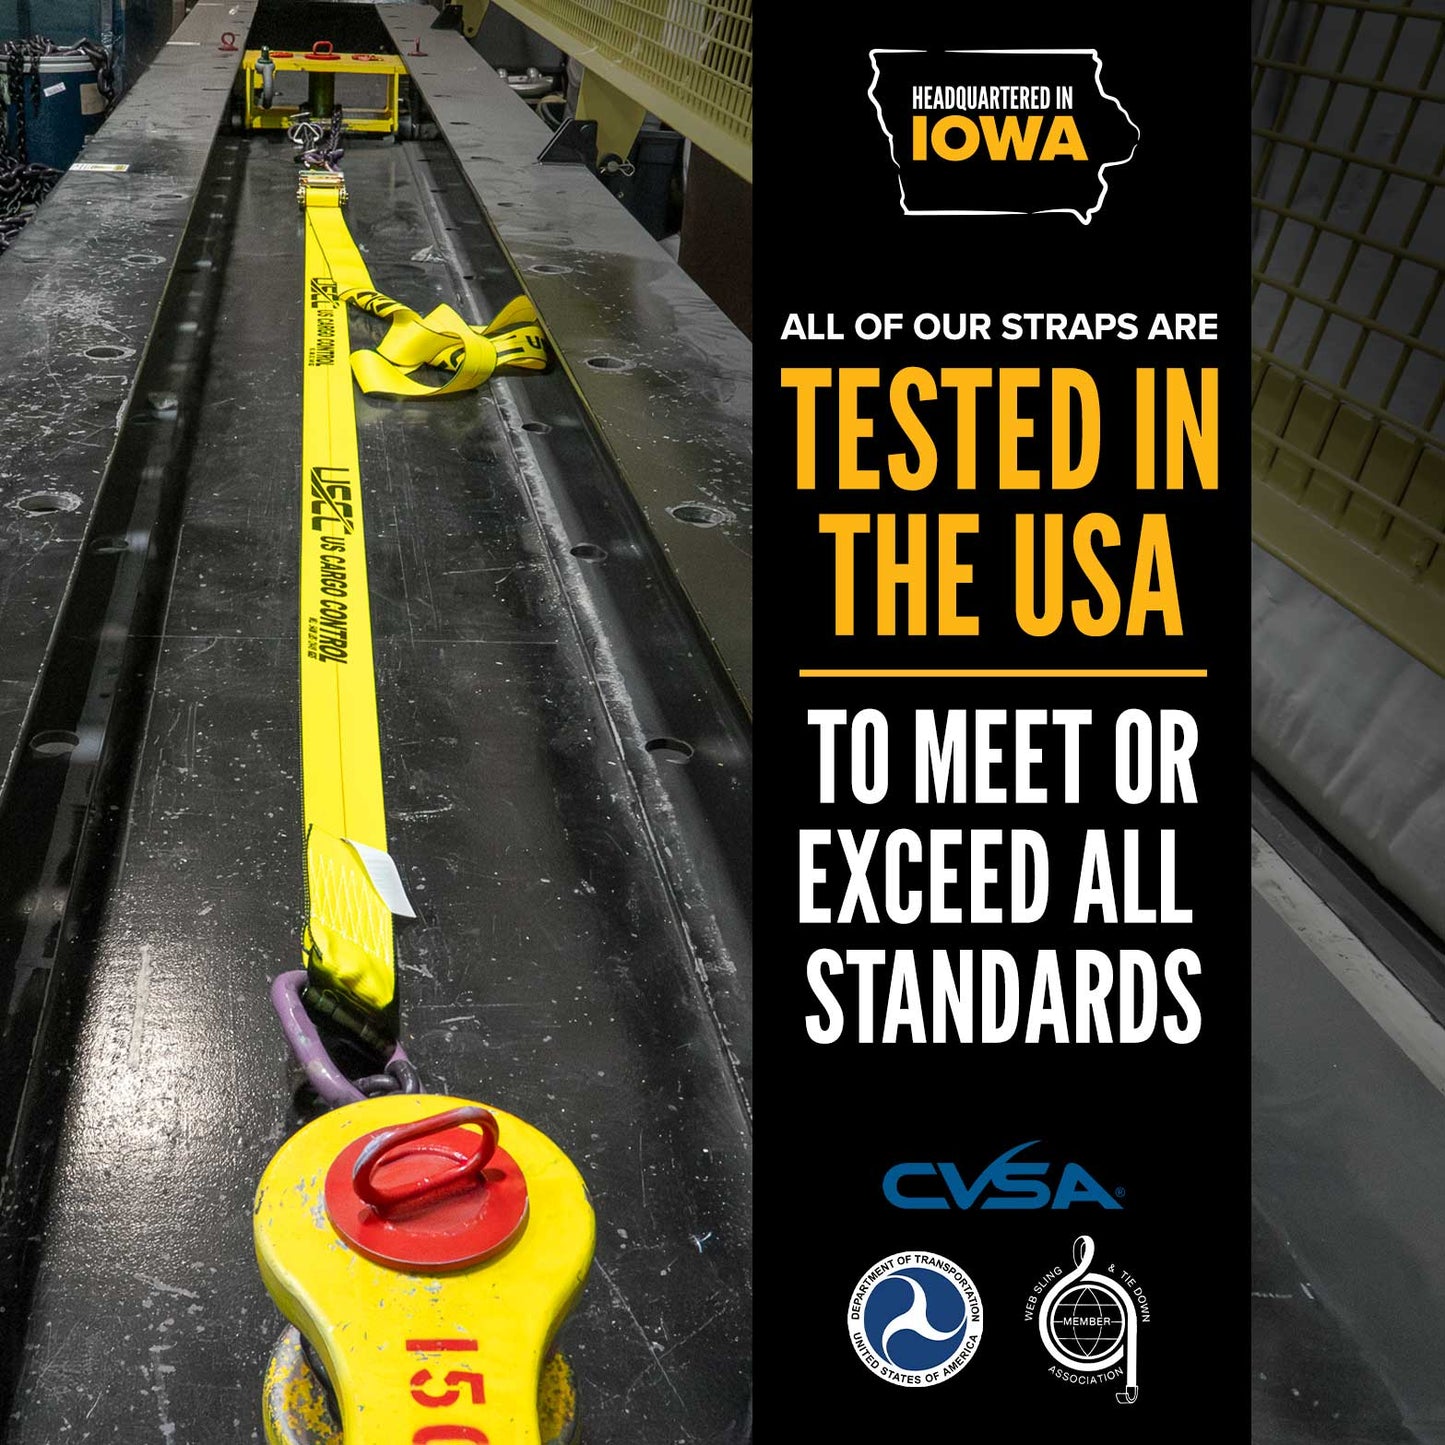  e track straps tested in the USA